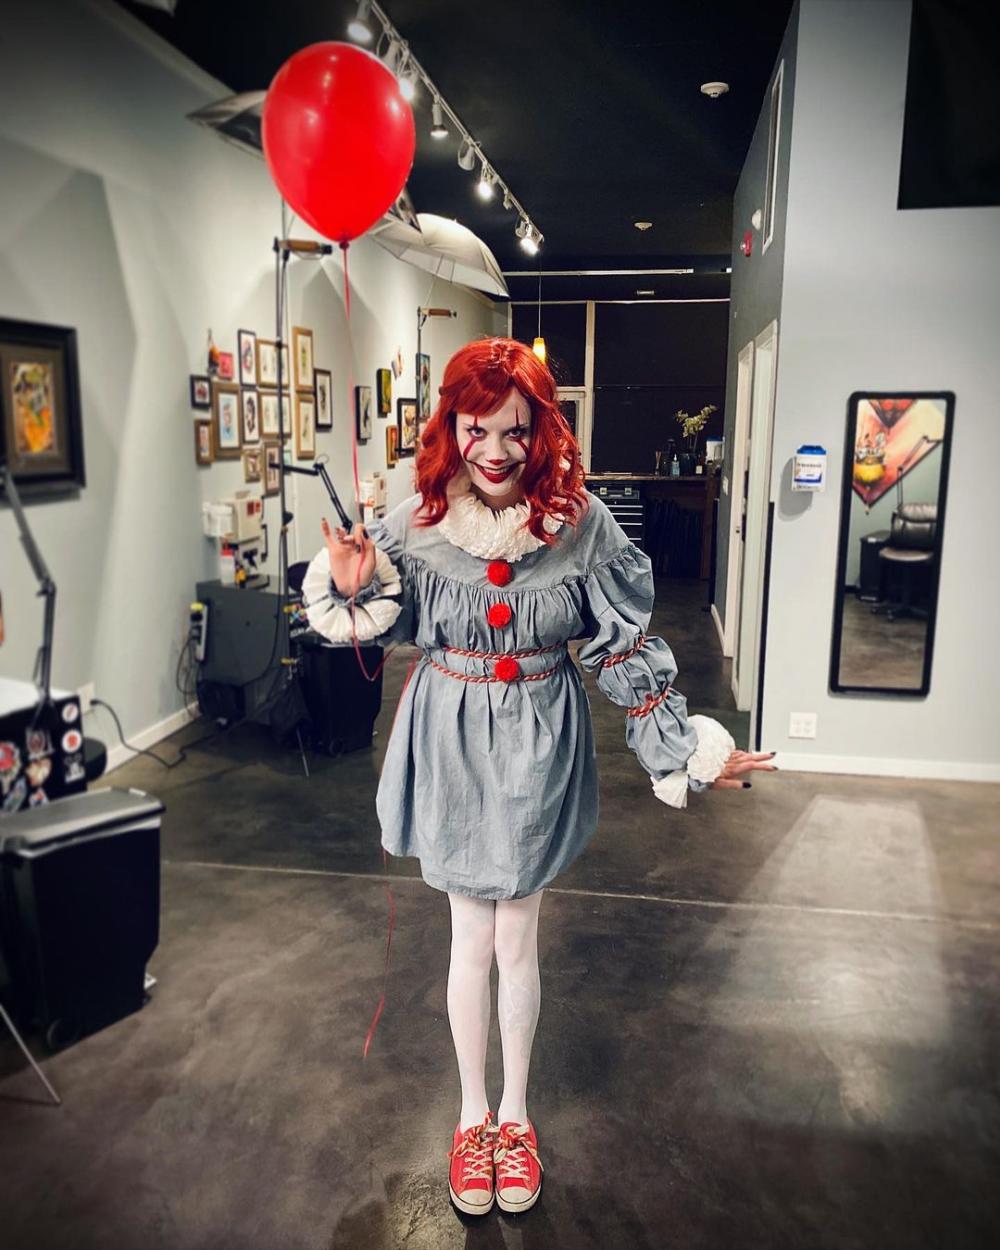 Pennywise costume